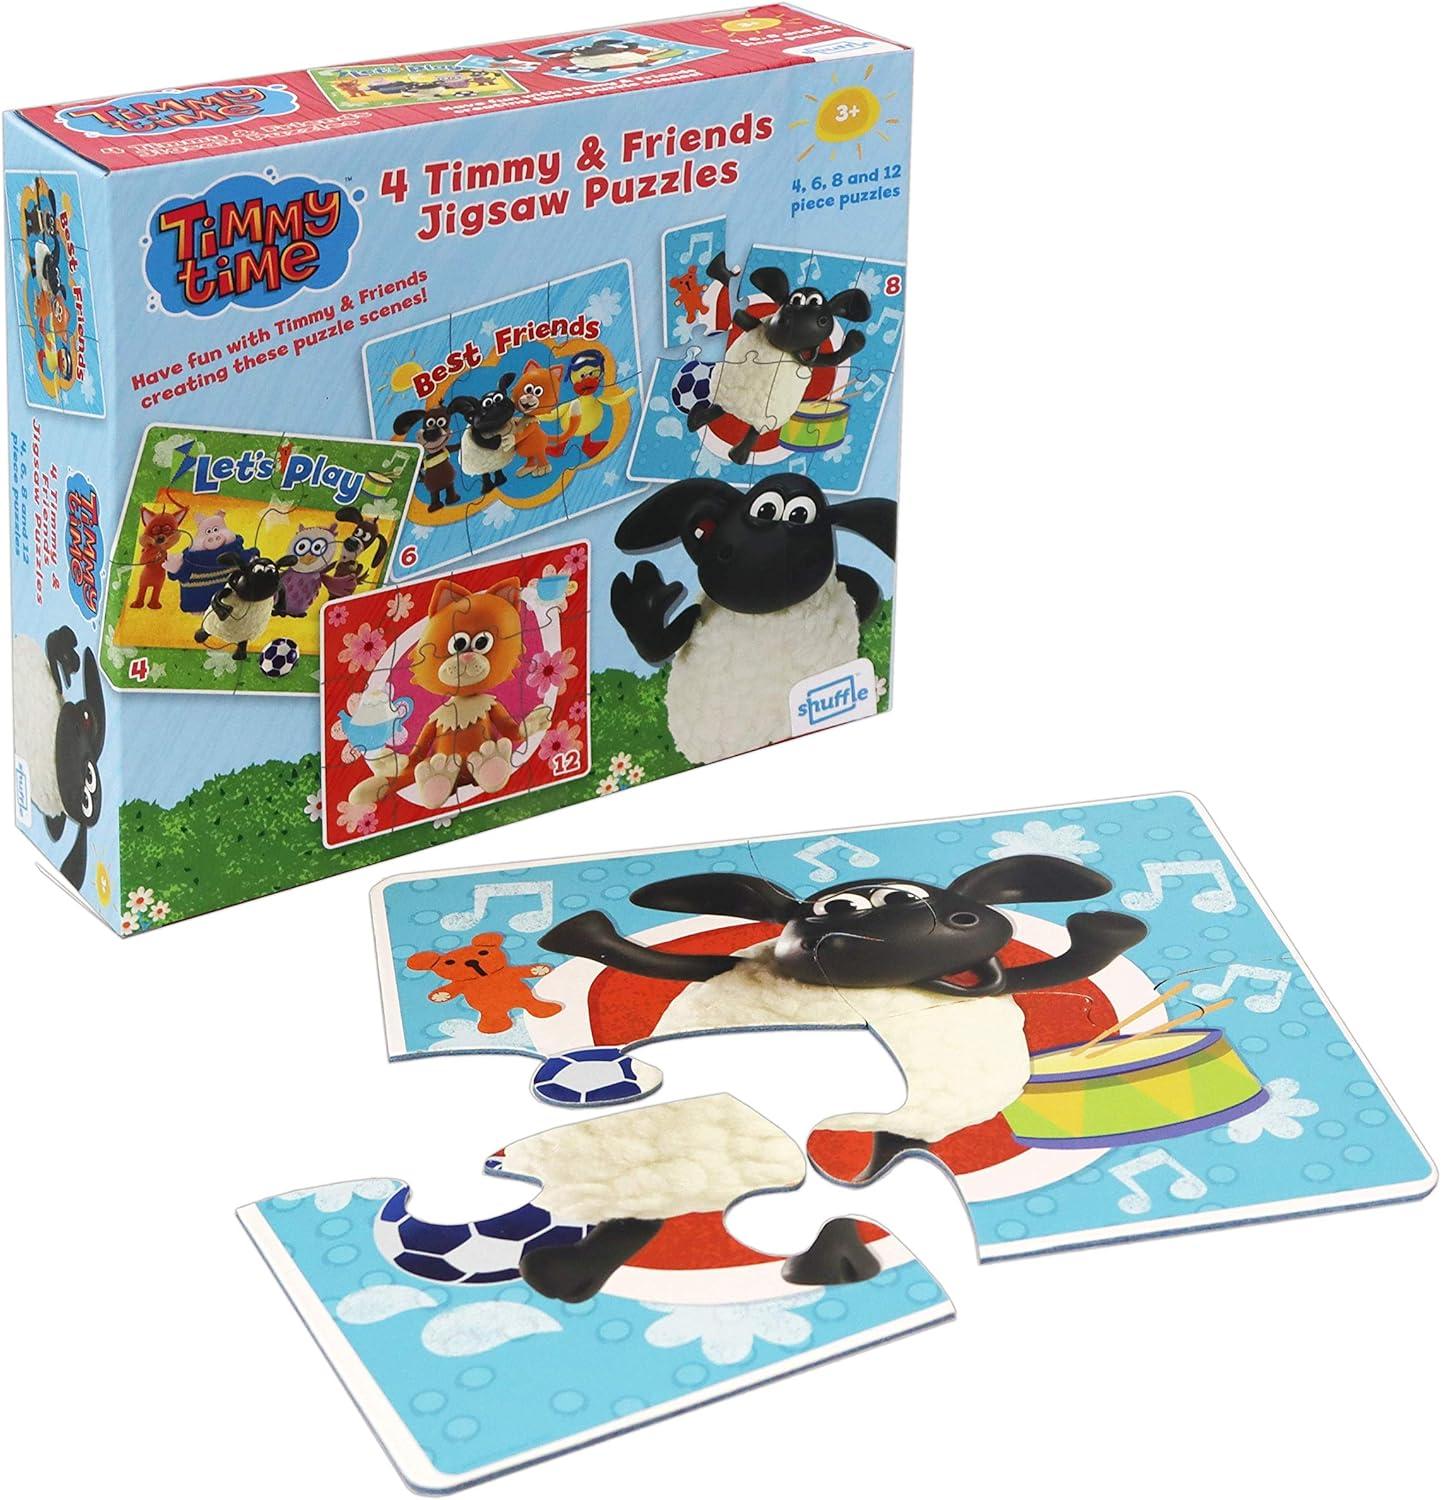 Shuffle Timmy and Friends 4 x Jigsaw Puzzles